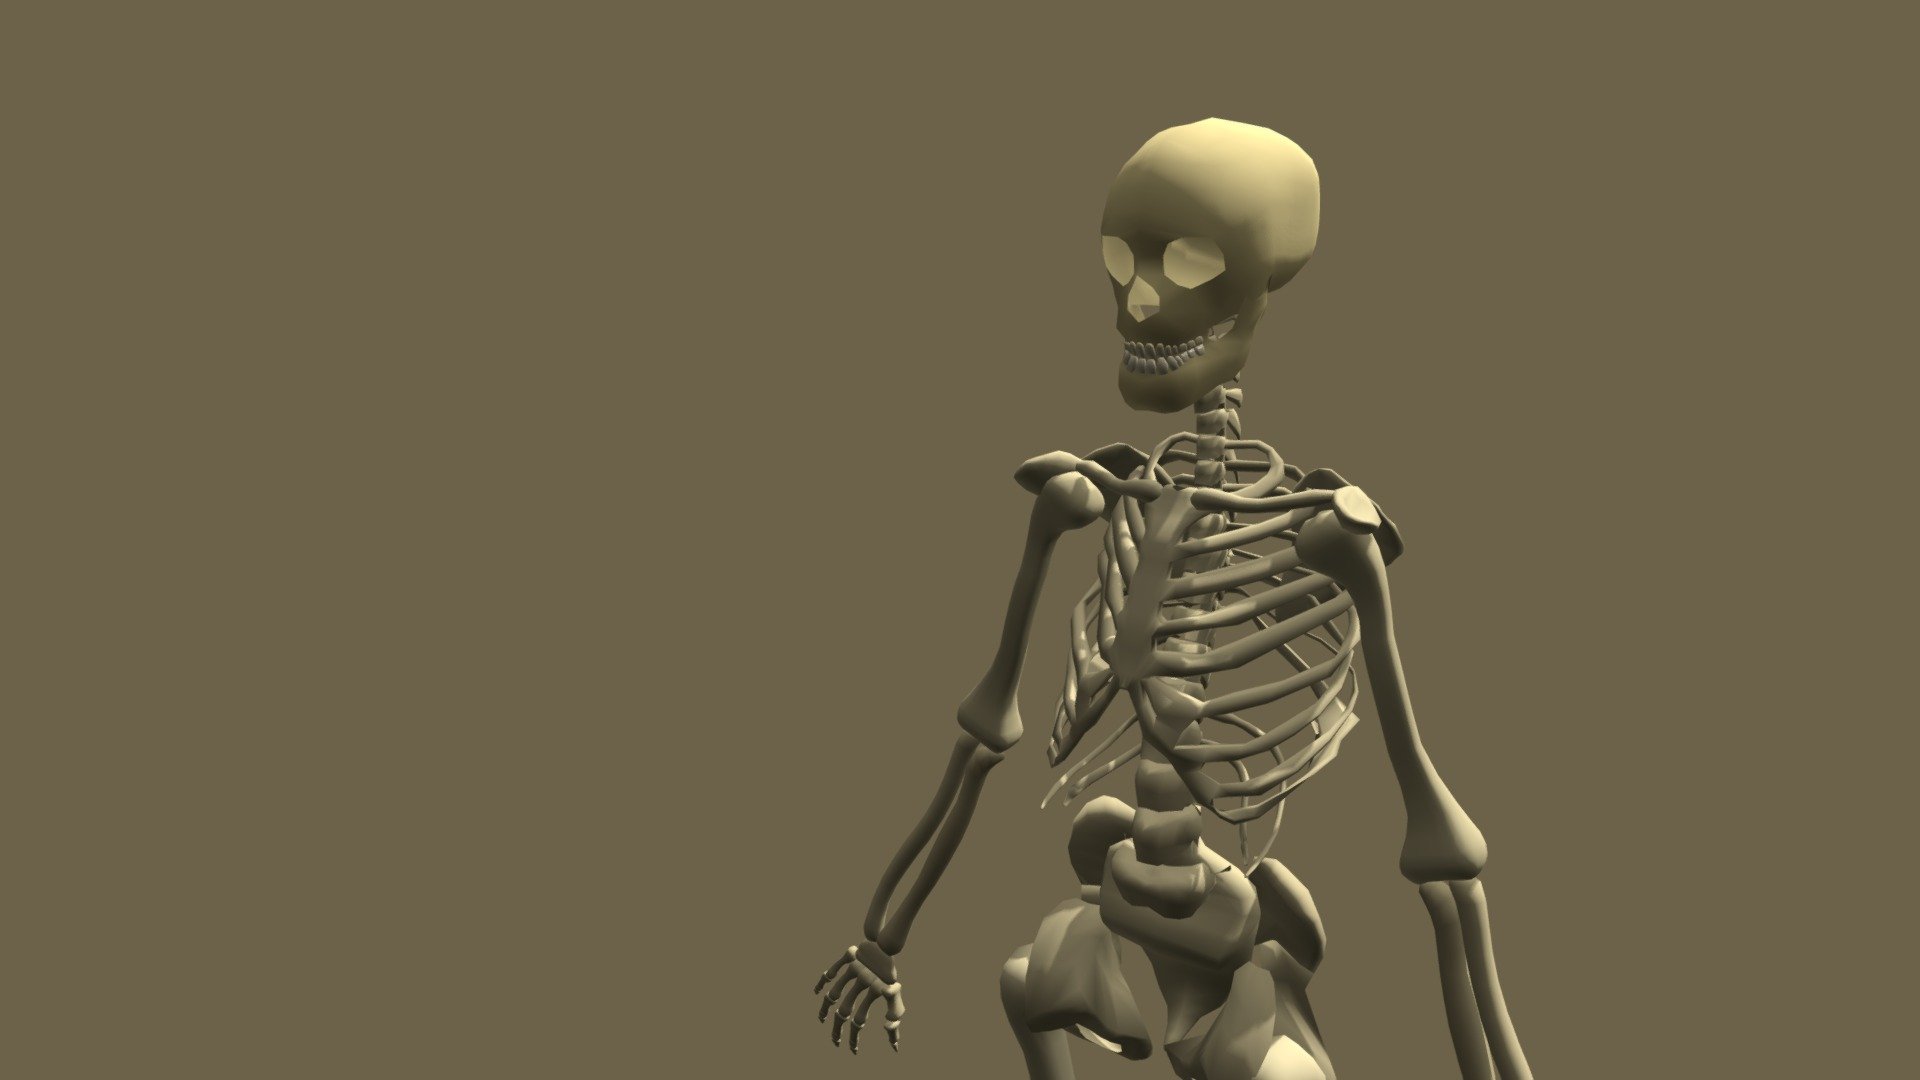 a low poly skeleton wich i create .all the principal bones are separe ( skull, spine , rib cage , ilium , femur , tibi , feet , humerus , radius , ulna ,and hand).
if someone want to download the model ,just post a comment.
sorry for my english 3d model